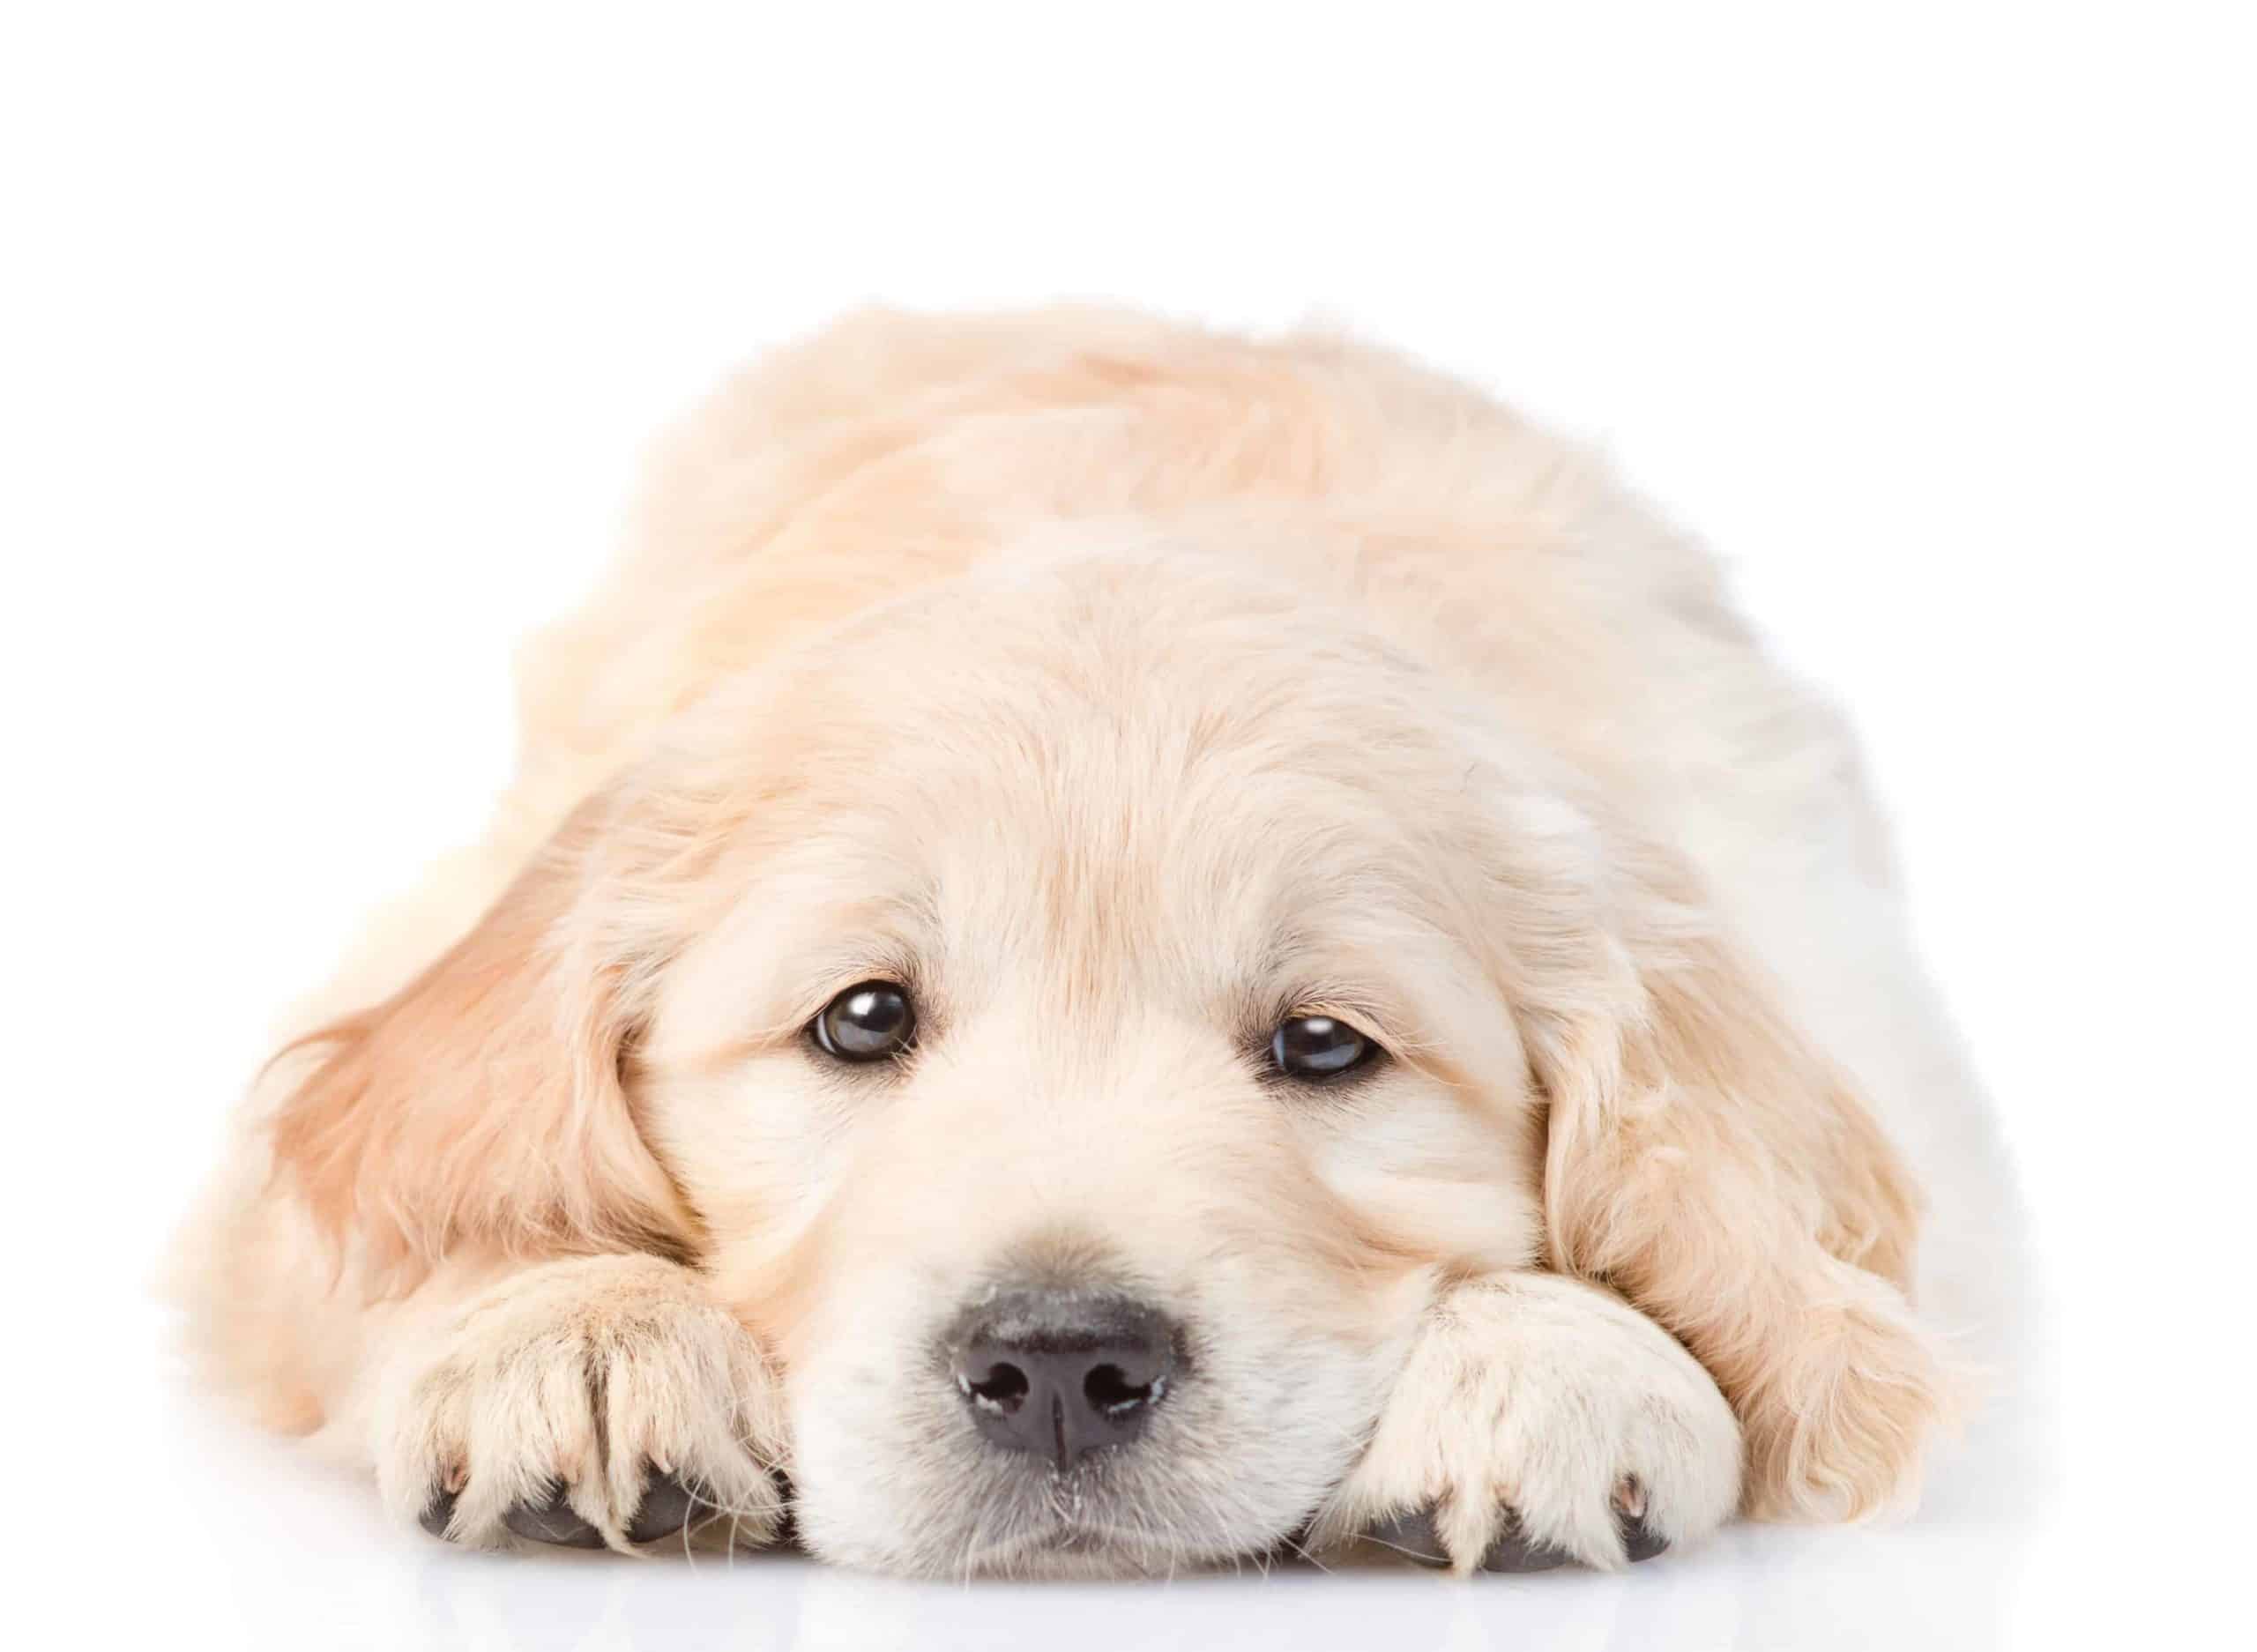 Sleepy Labrador retriever puppy on white background. For Labrador retrievers, a persistent cough could indicate a severe problem with the trachea.